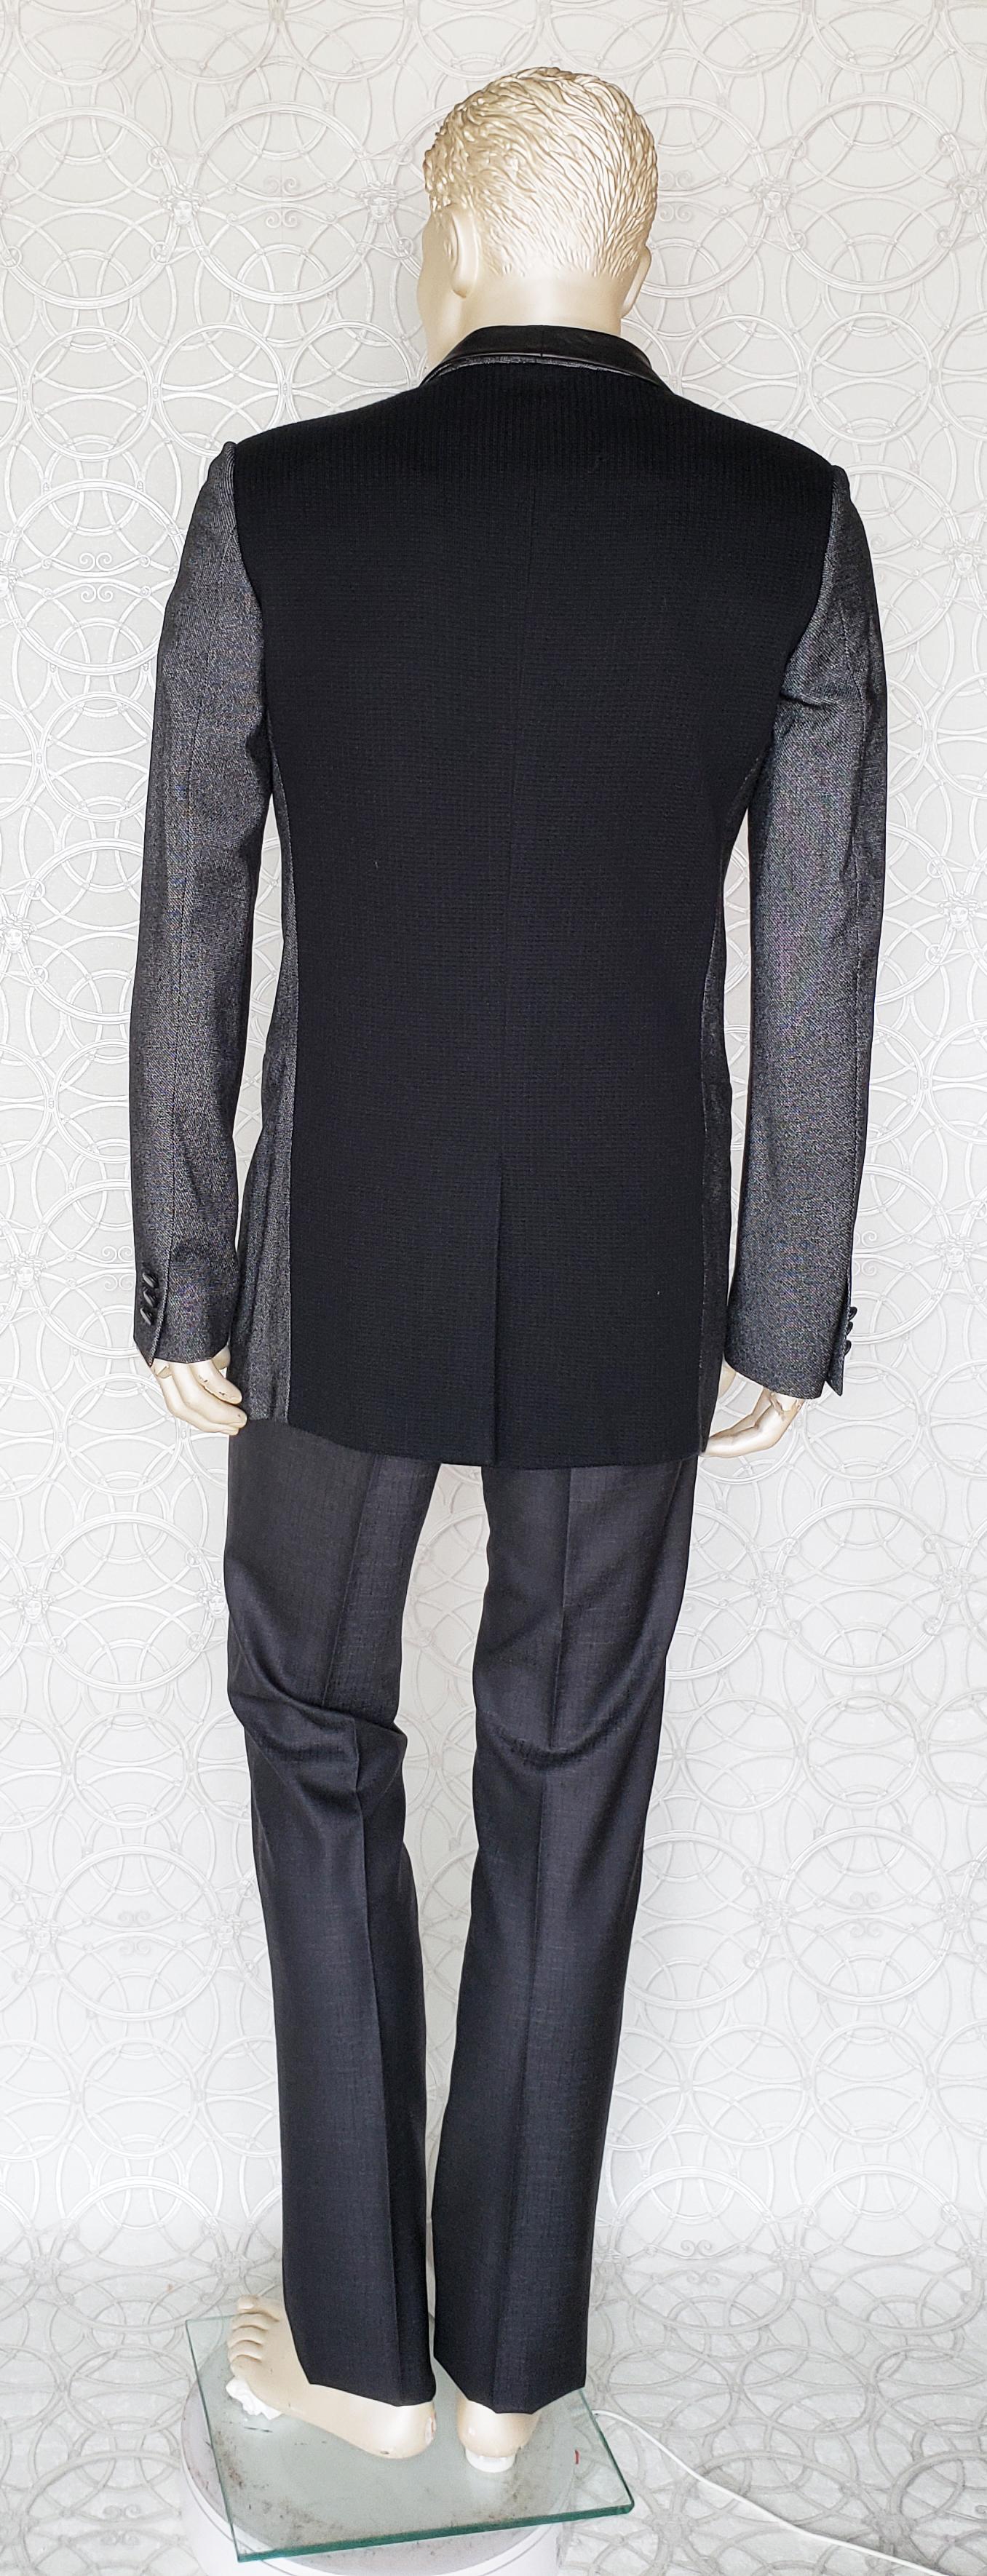 Gray S/S 2011 look #7 NEW VERSACE GRAY WOOL and SILK SUIT 48 - 38 (M) For Sale